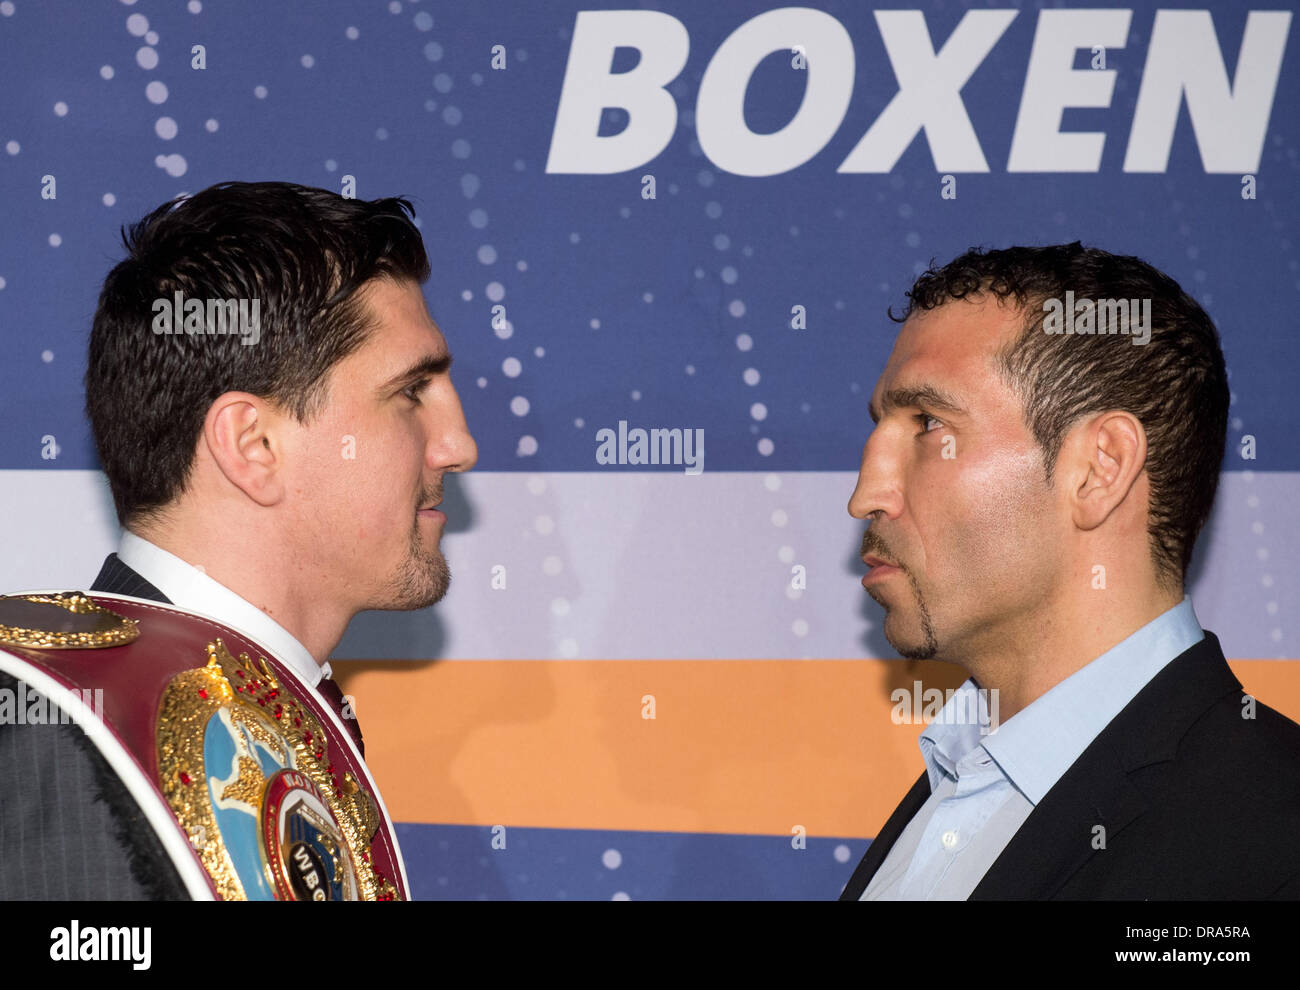 Stuttgart, Germany. 22nd Jan, 2014. German WBO Cruiserweight Champion Marco Huck (L) and his challenger Firat Arslan face off during a press conference in Stuttgart, Germany, 22 January 2014. The WBO Cruiserweight Championship bout will take place on 25 January. Photo: SEBASTIAN KAHNERT/dpa/Alamy Live News Stock Photo